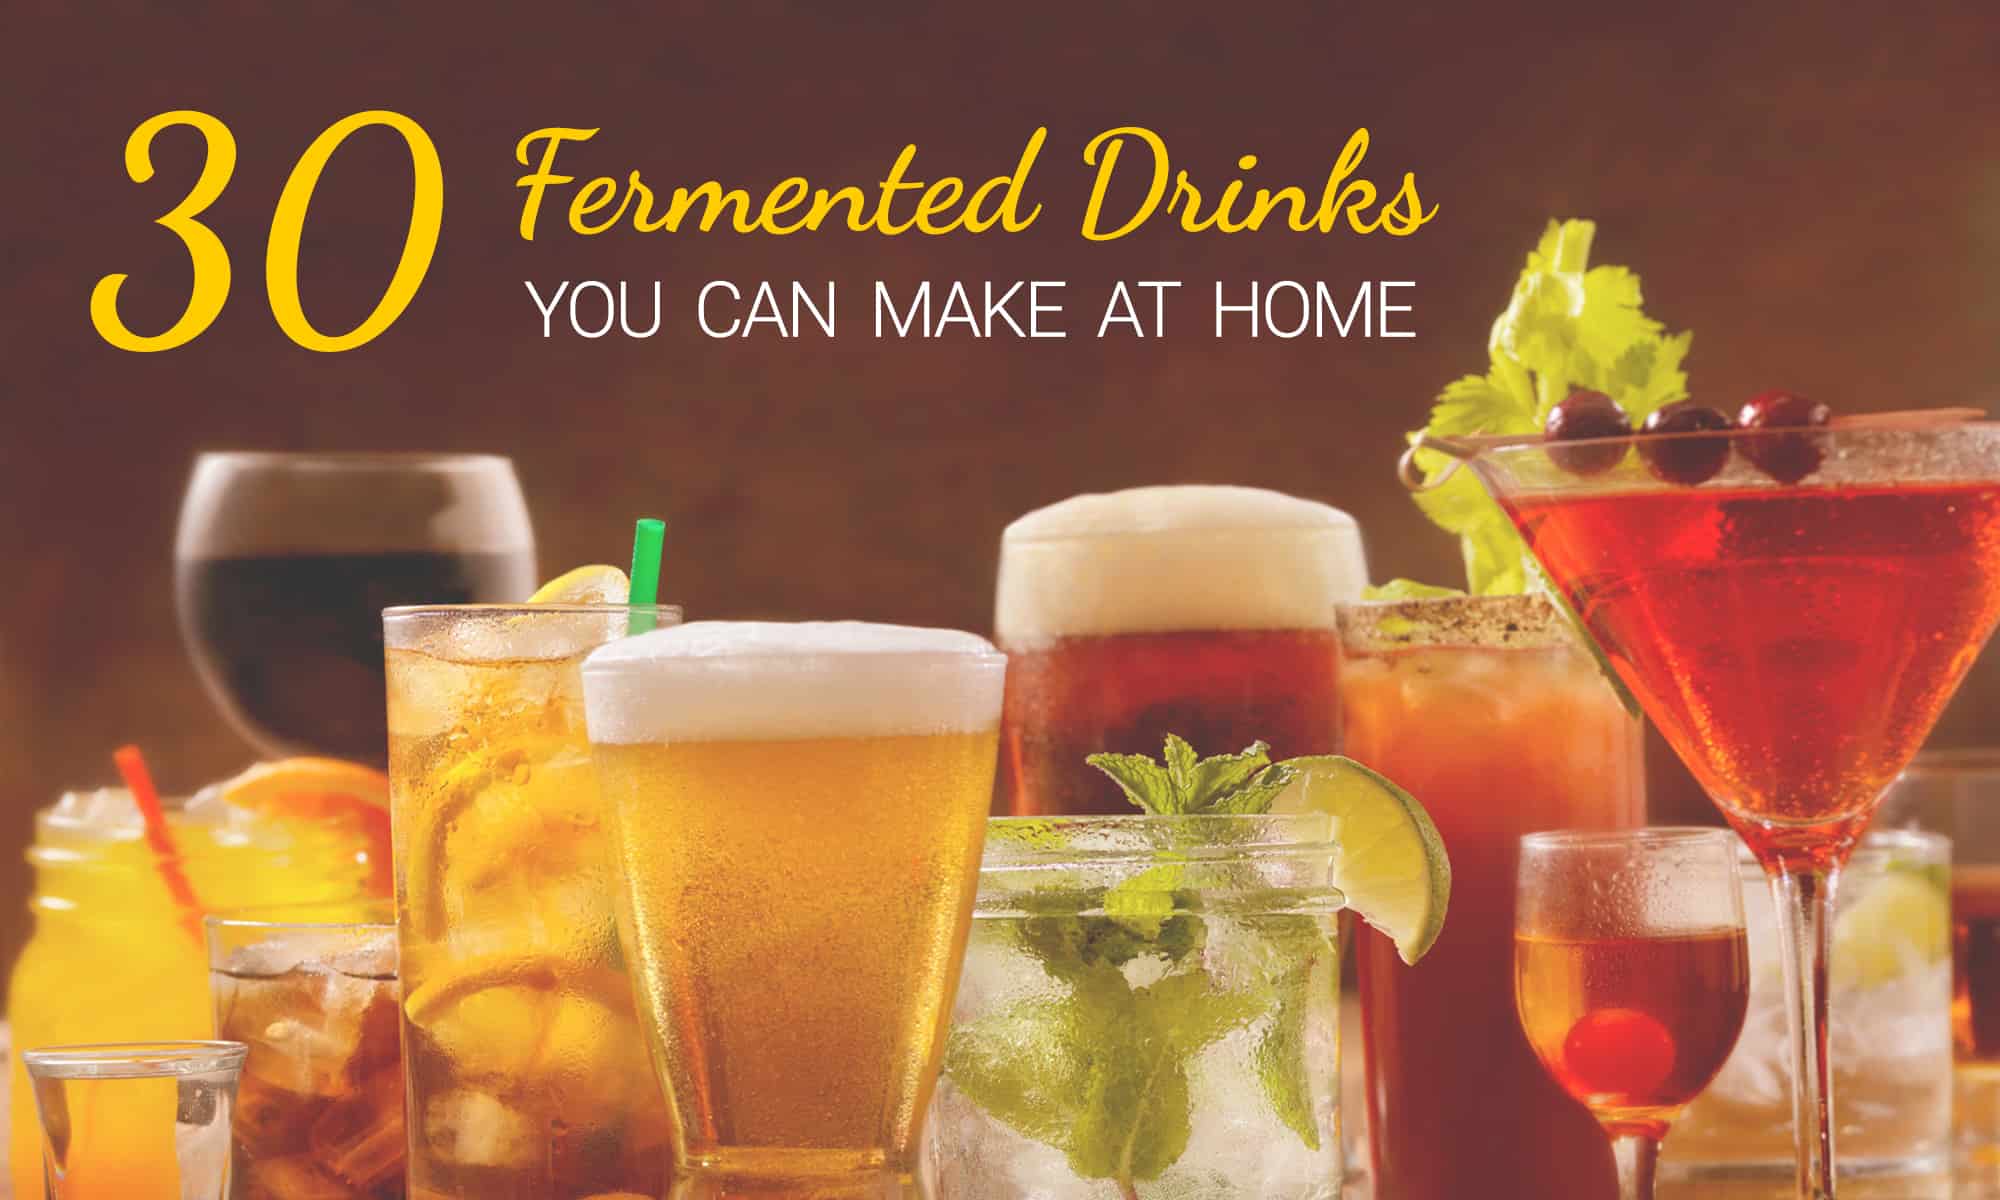 30 Fermented Drinks You Can Make at Home | My Fermented Foods